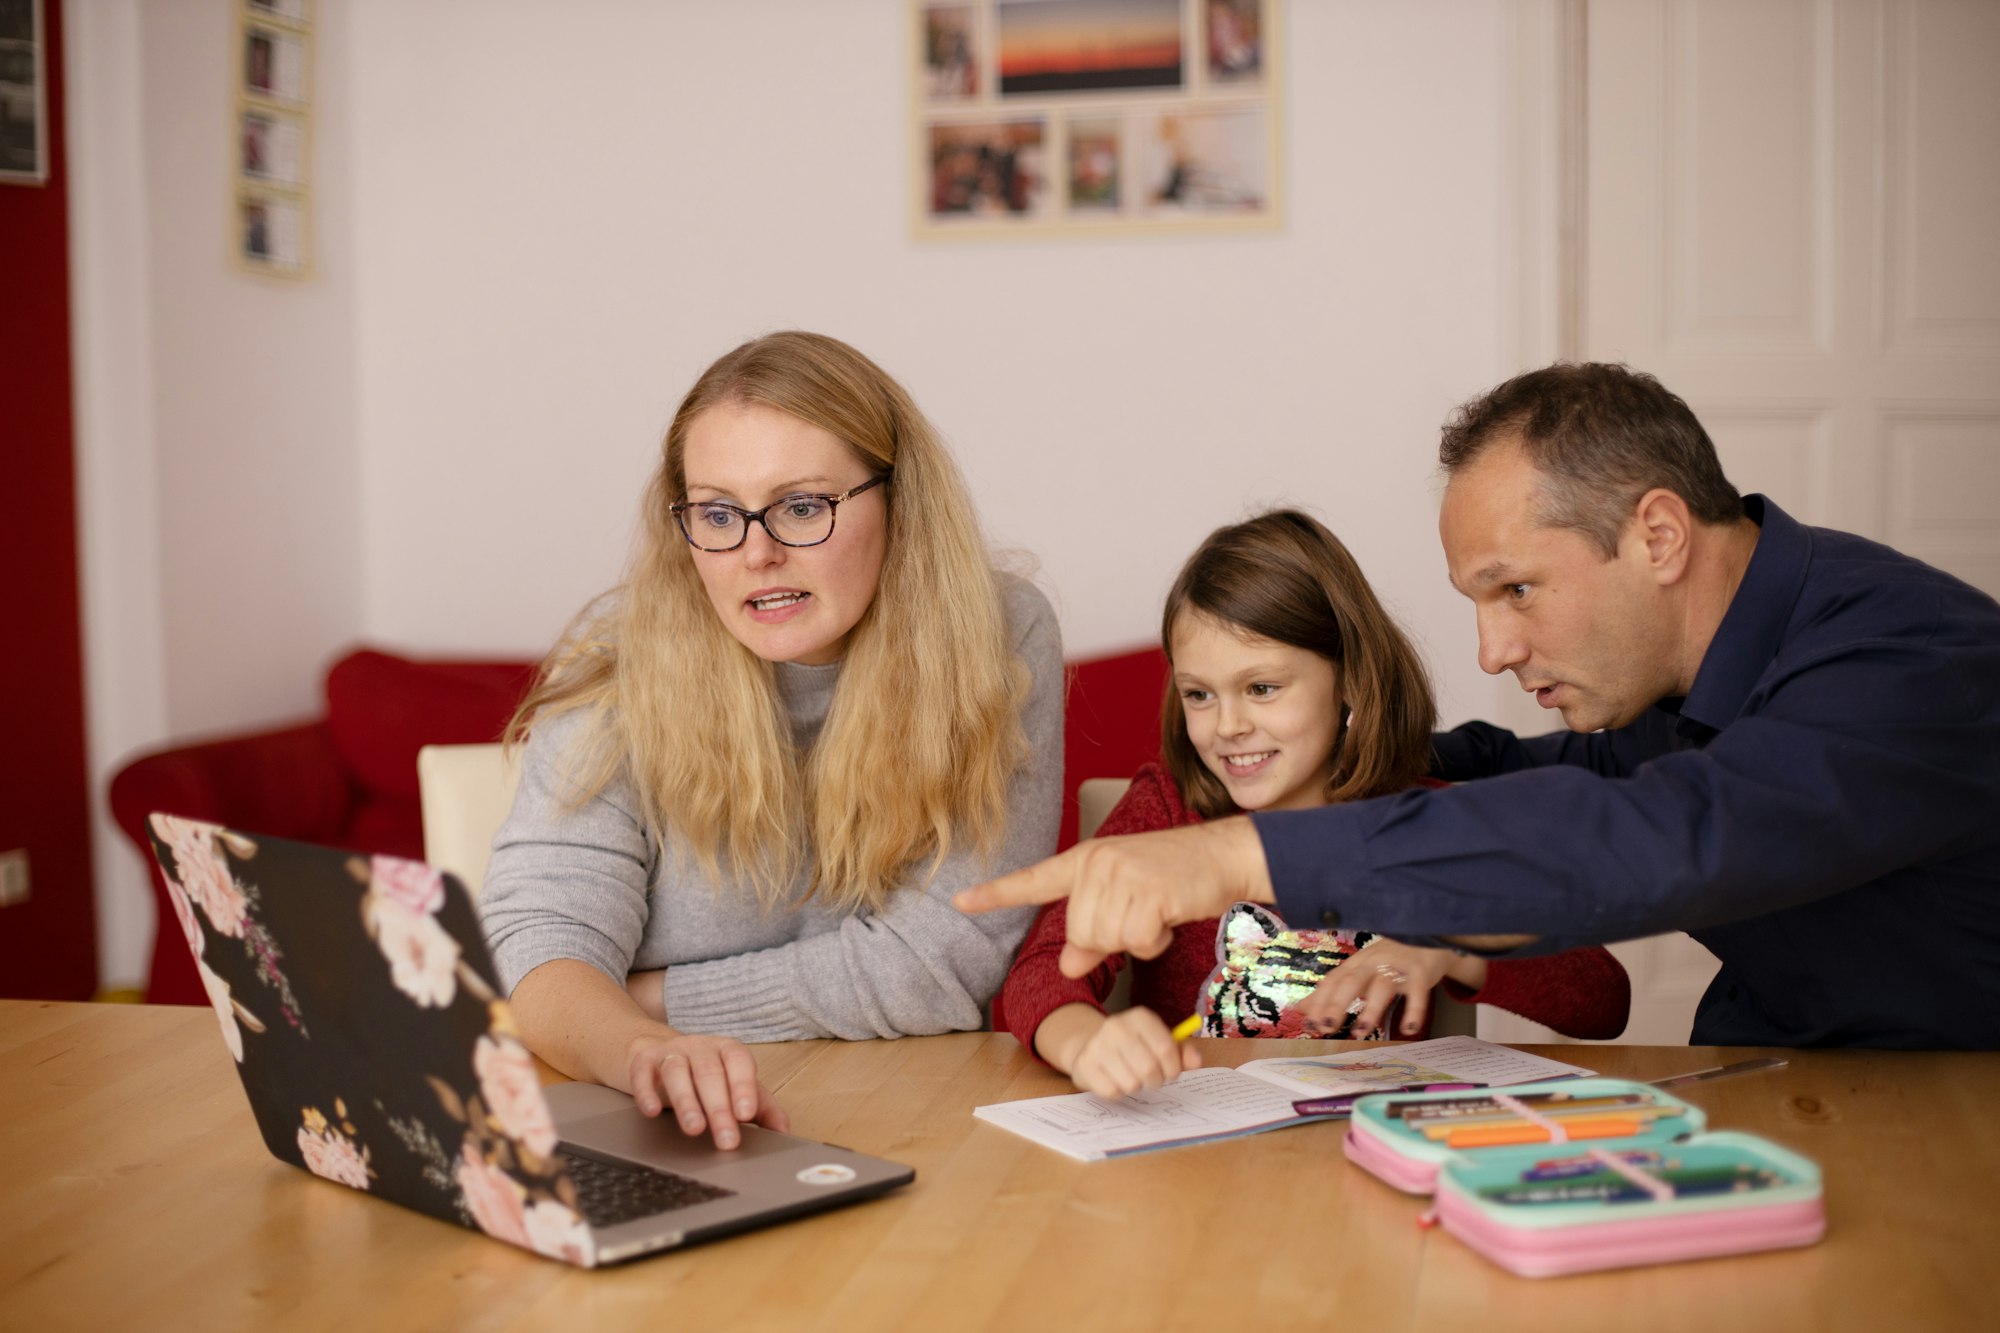 Parents learning teaching their child during homeschooling.